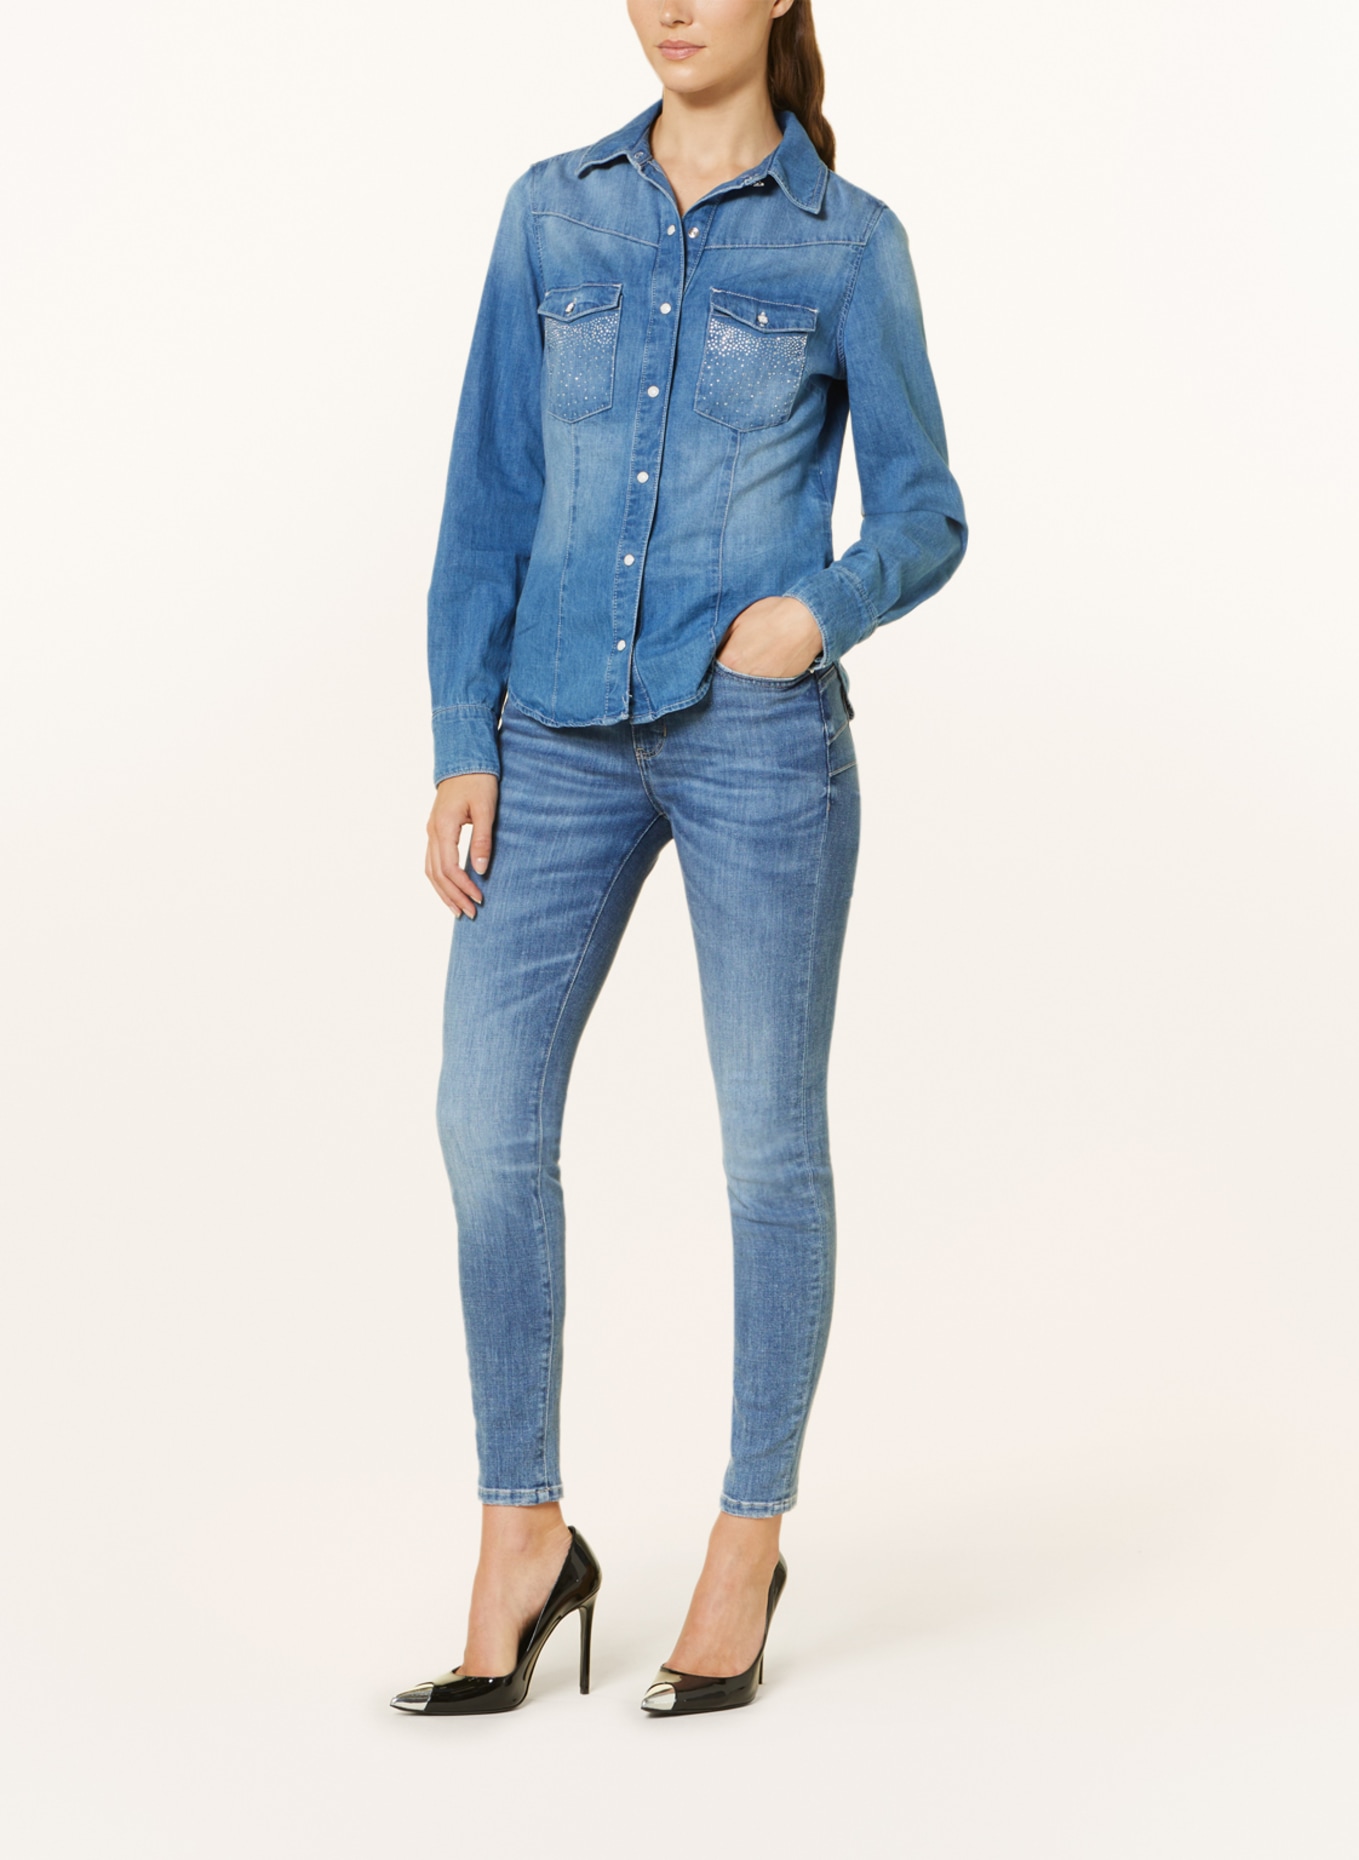 GUESS Denim blouse EQUITY with decorative gems, Color: BLUE (Image 2)